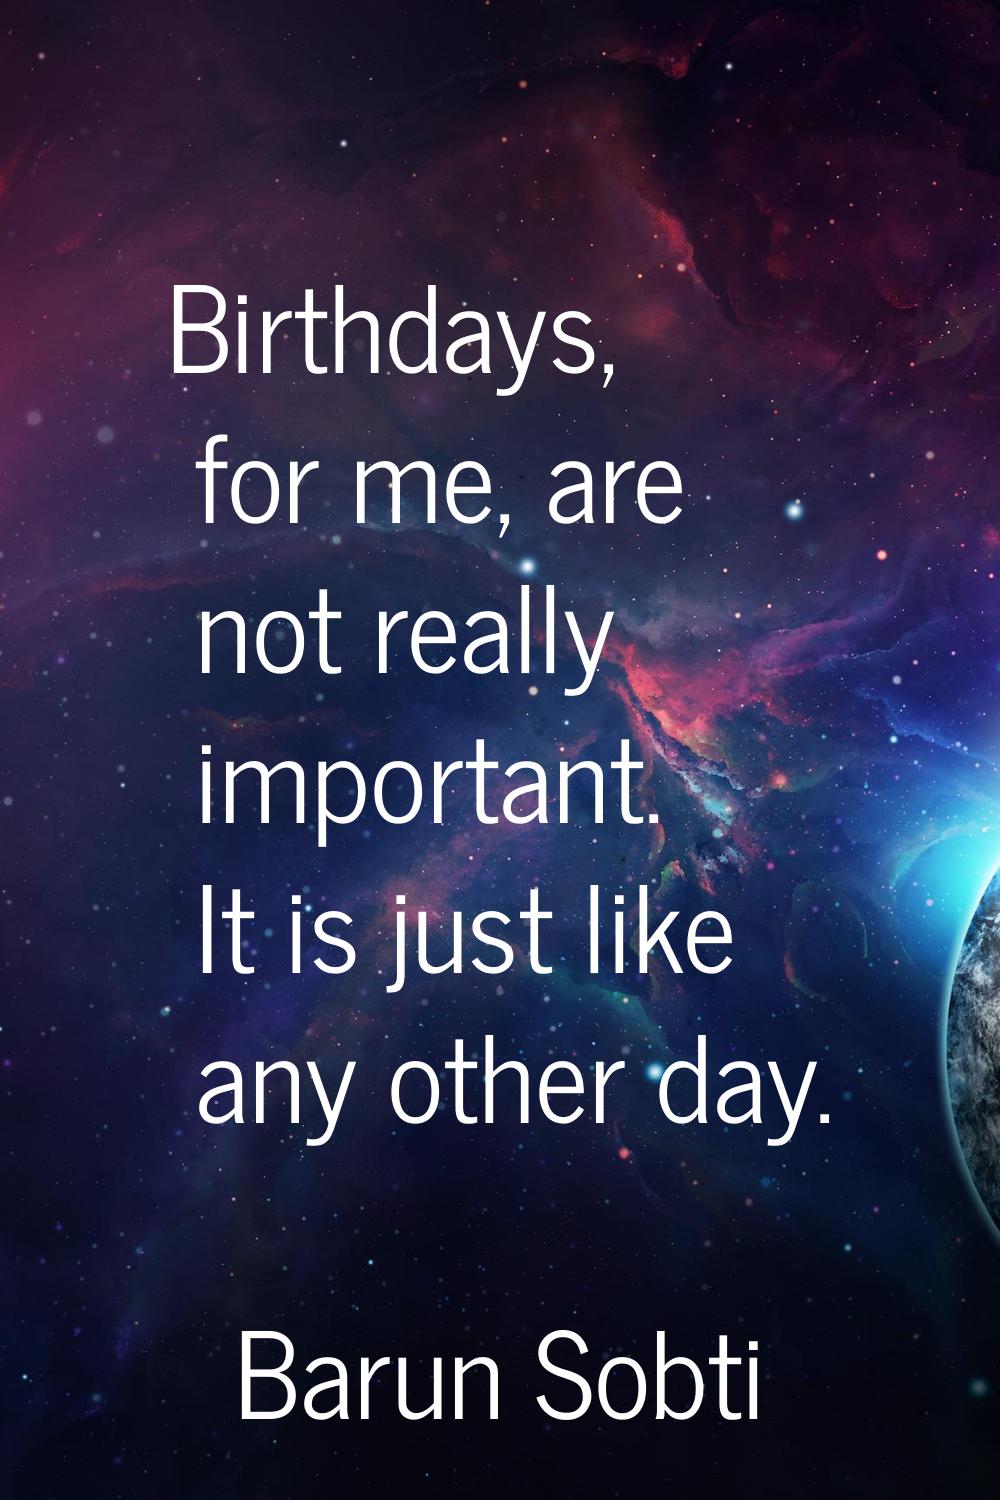 Birthdays, for me, are not really important. It is just like any other day.